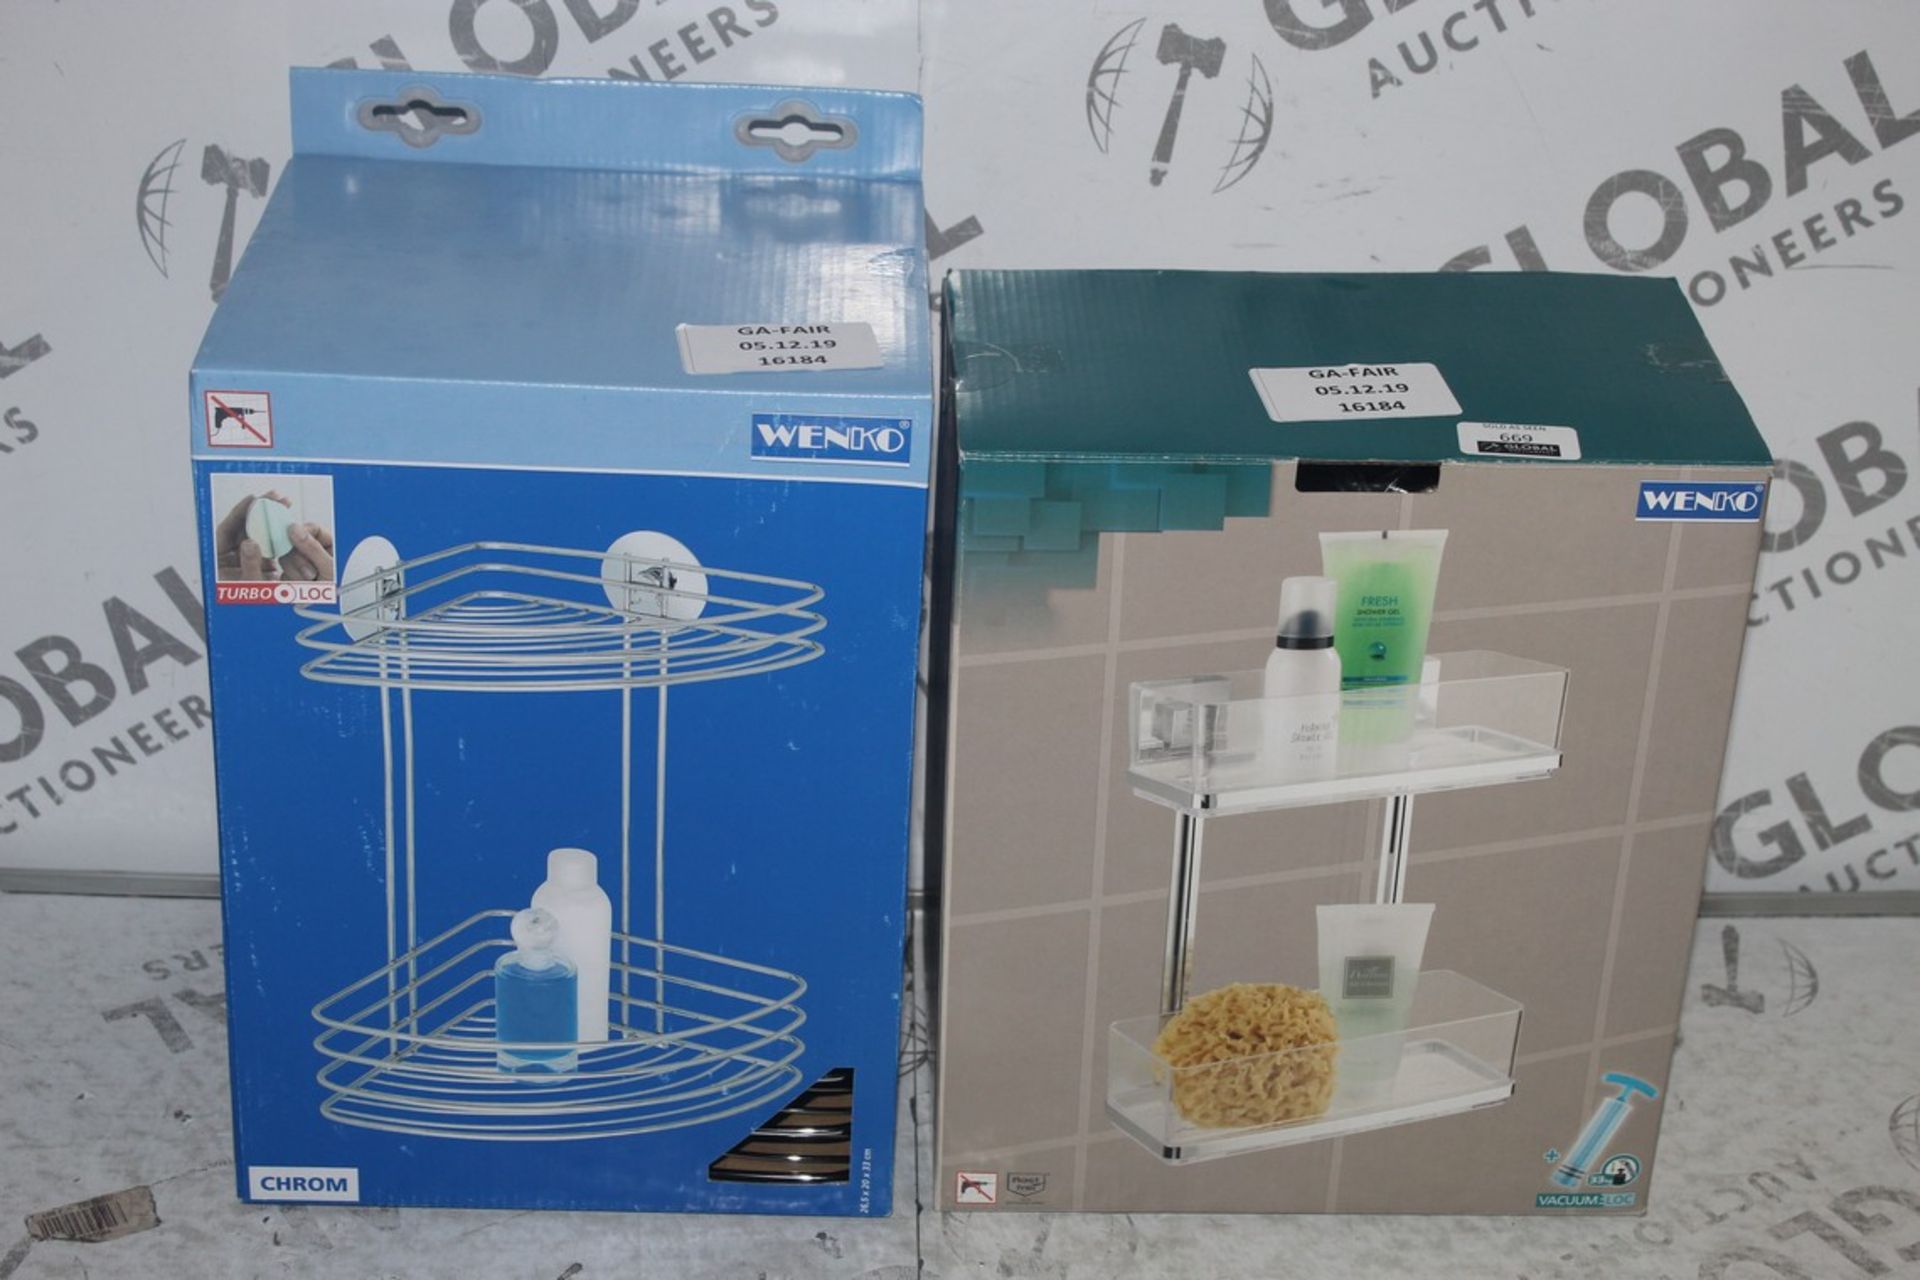 Boxed Assorted Wenko Corner Shower Baskets and Suction Shower Baskets RRP £45 - £50 Each (16184) (